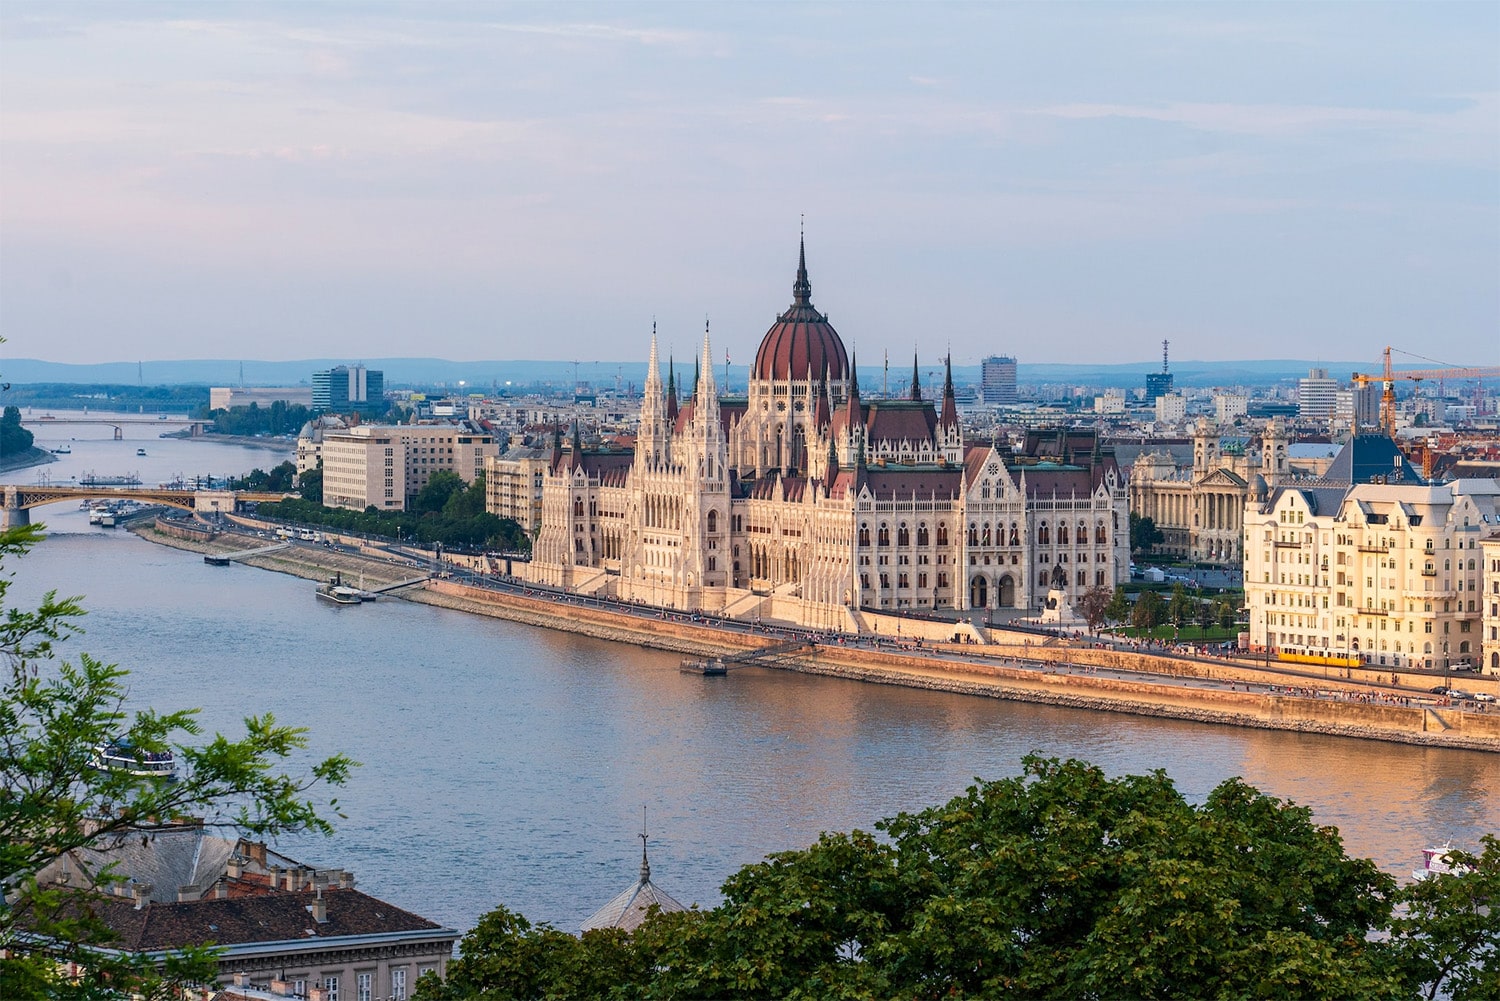 24 interesting facts about Hungary